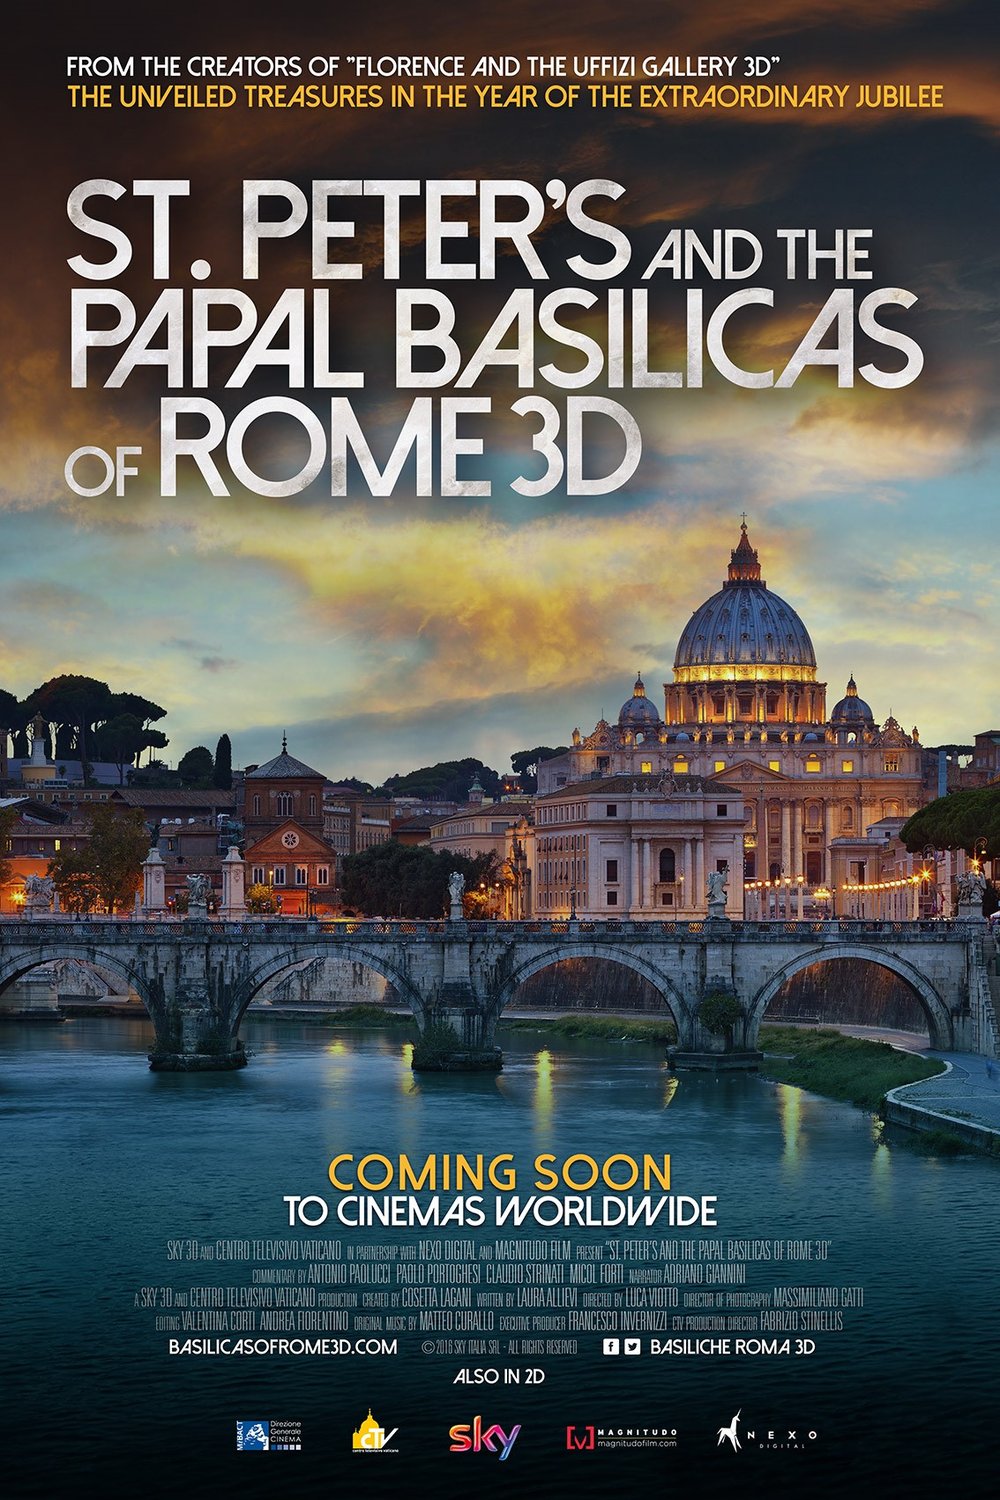 Poster of the movie St. Peter's and the Papal Basilicas of Rome